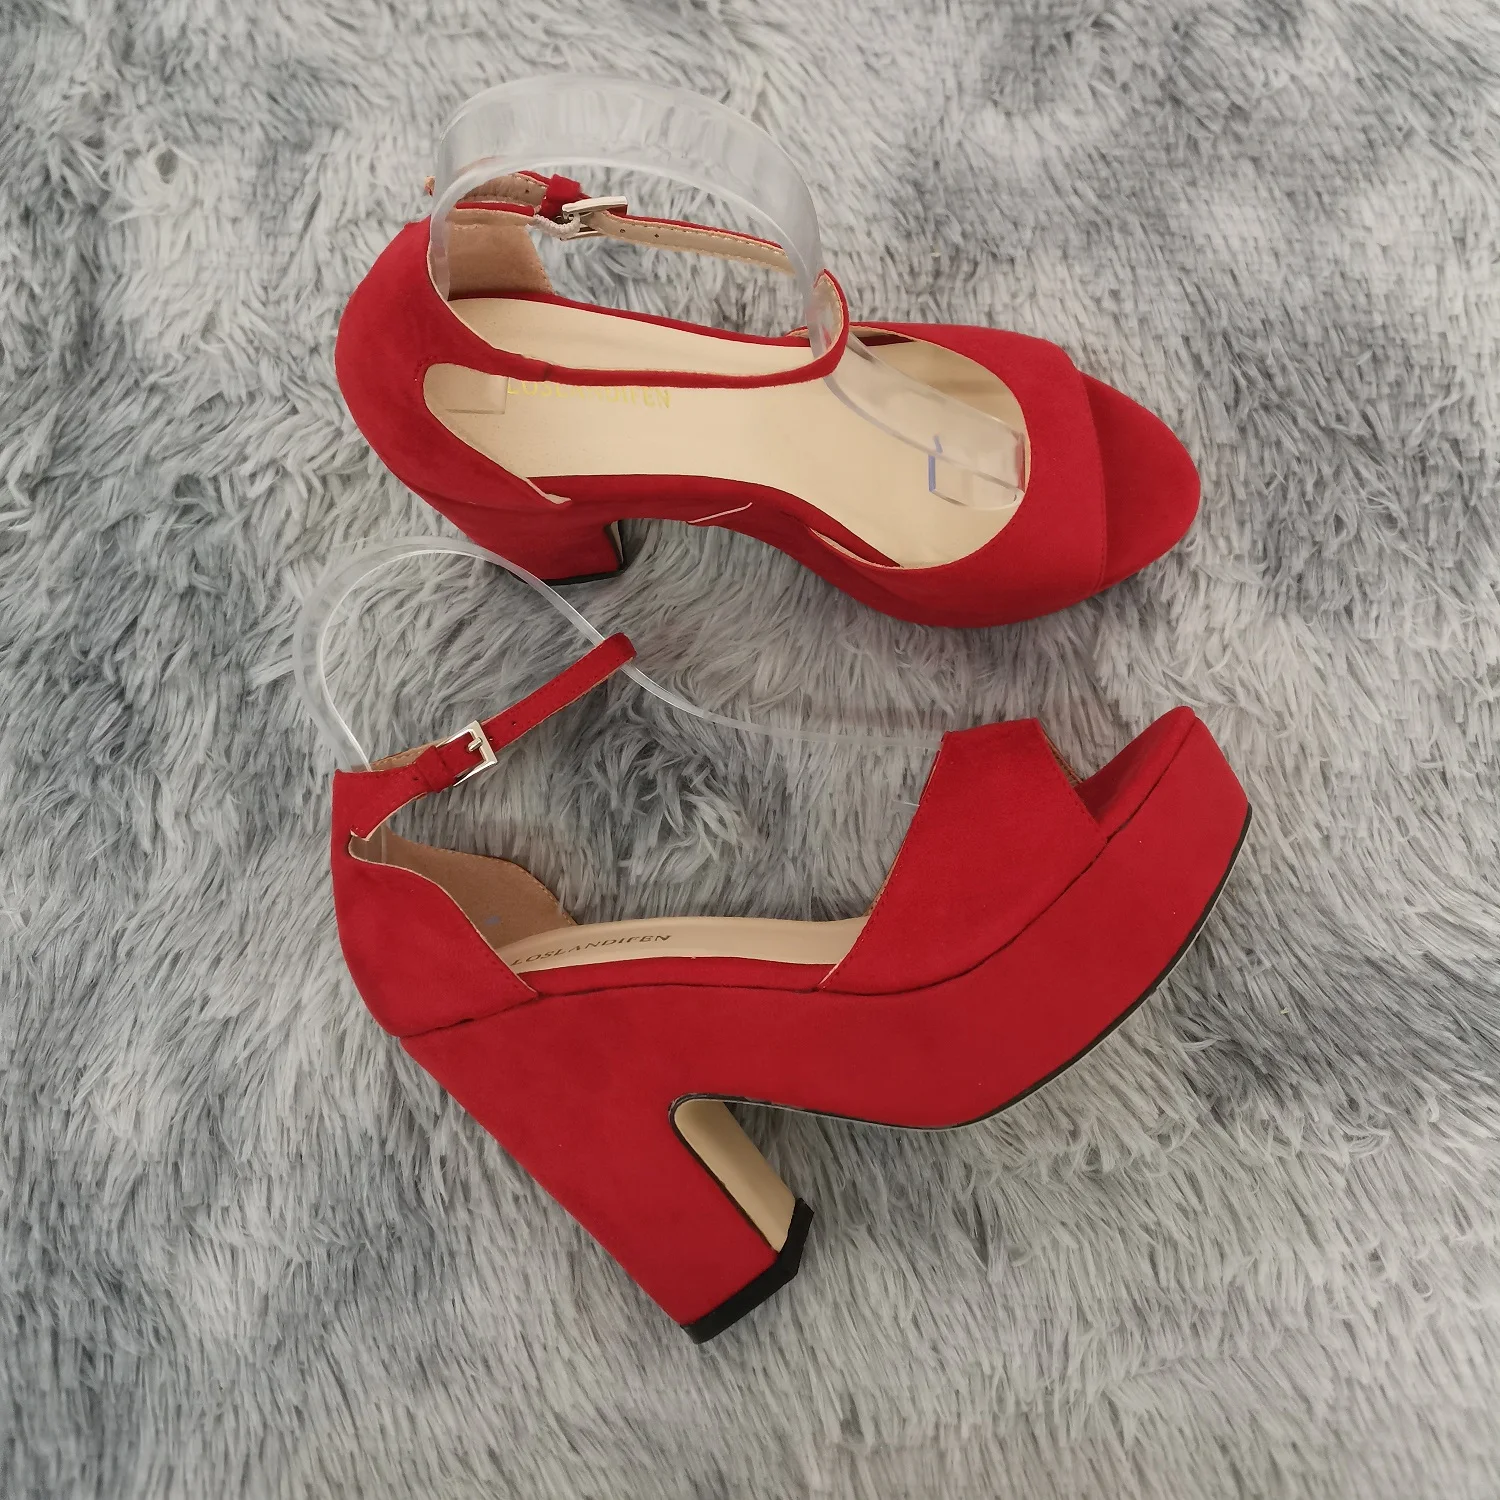 

Women Sandals Summer 12cm Sexy Peep Toe Thick High Heels Ankle Strap Sandal Square Flock Platform Red Wedding Shoes Plus Size